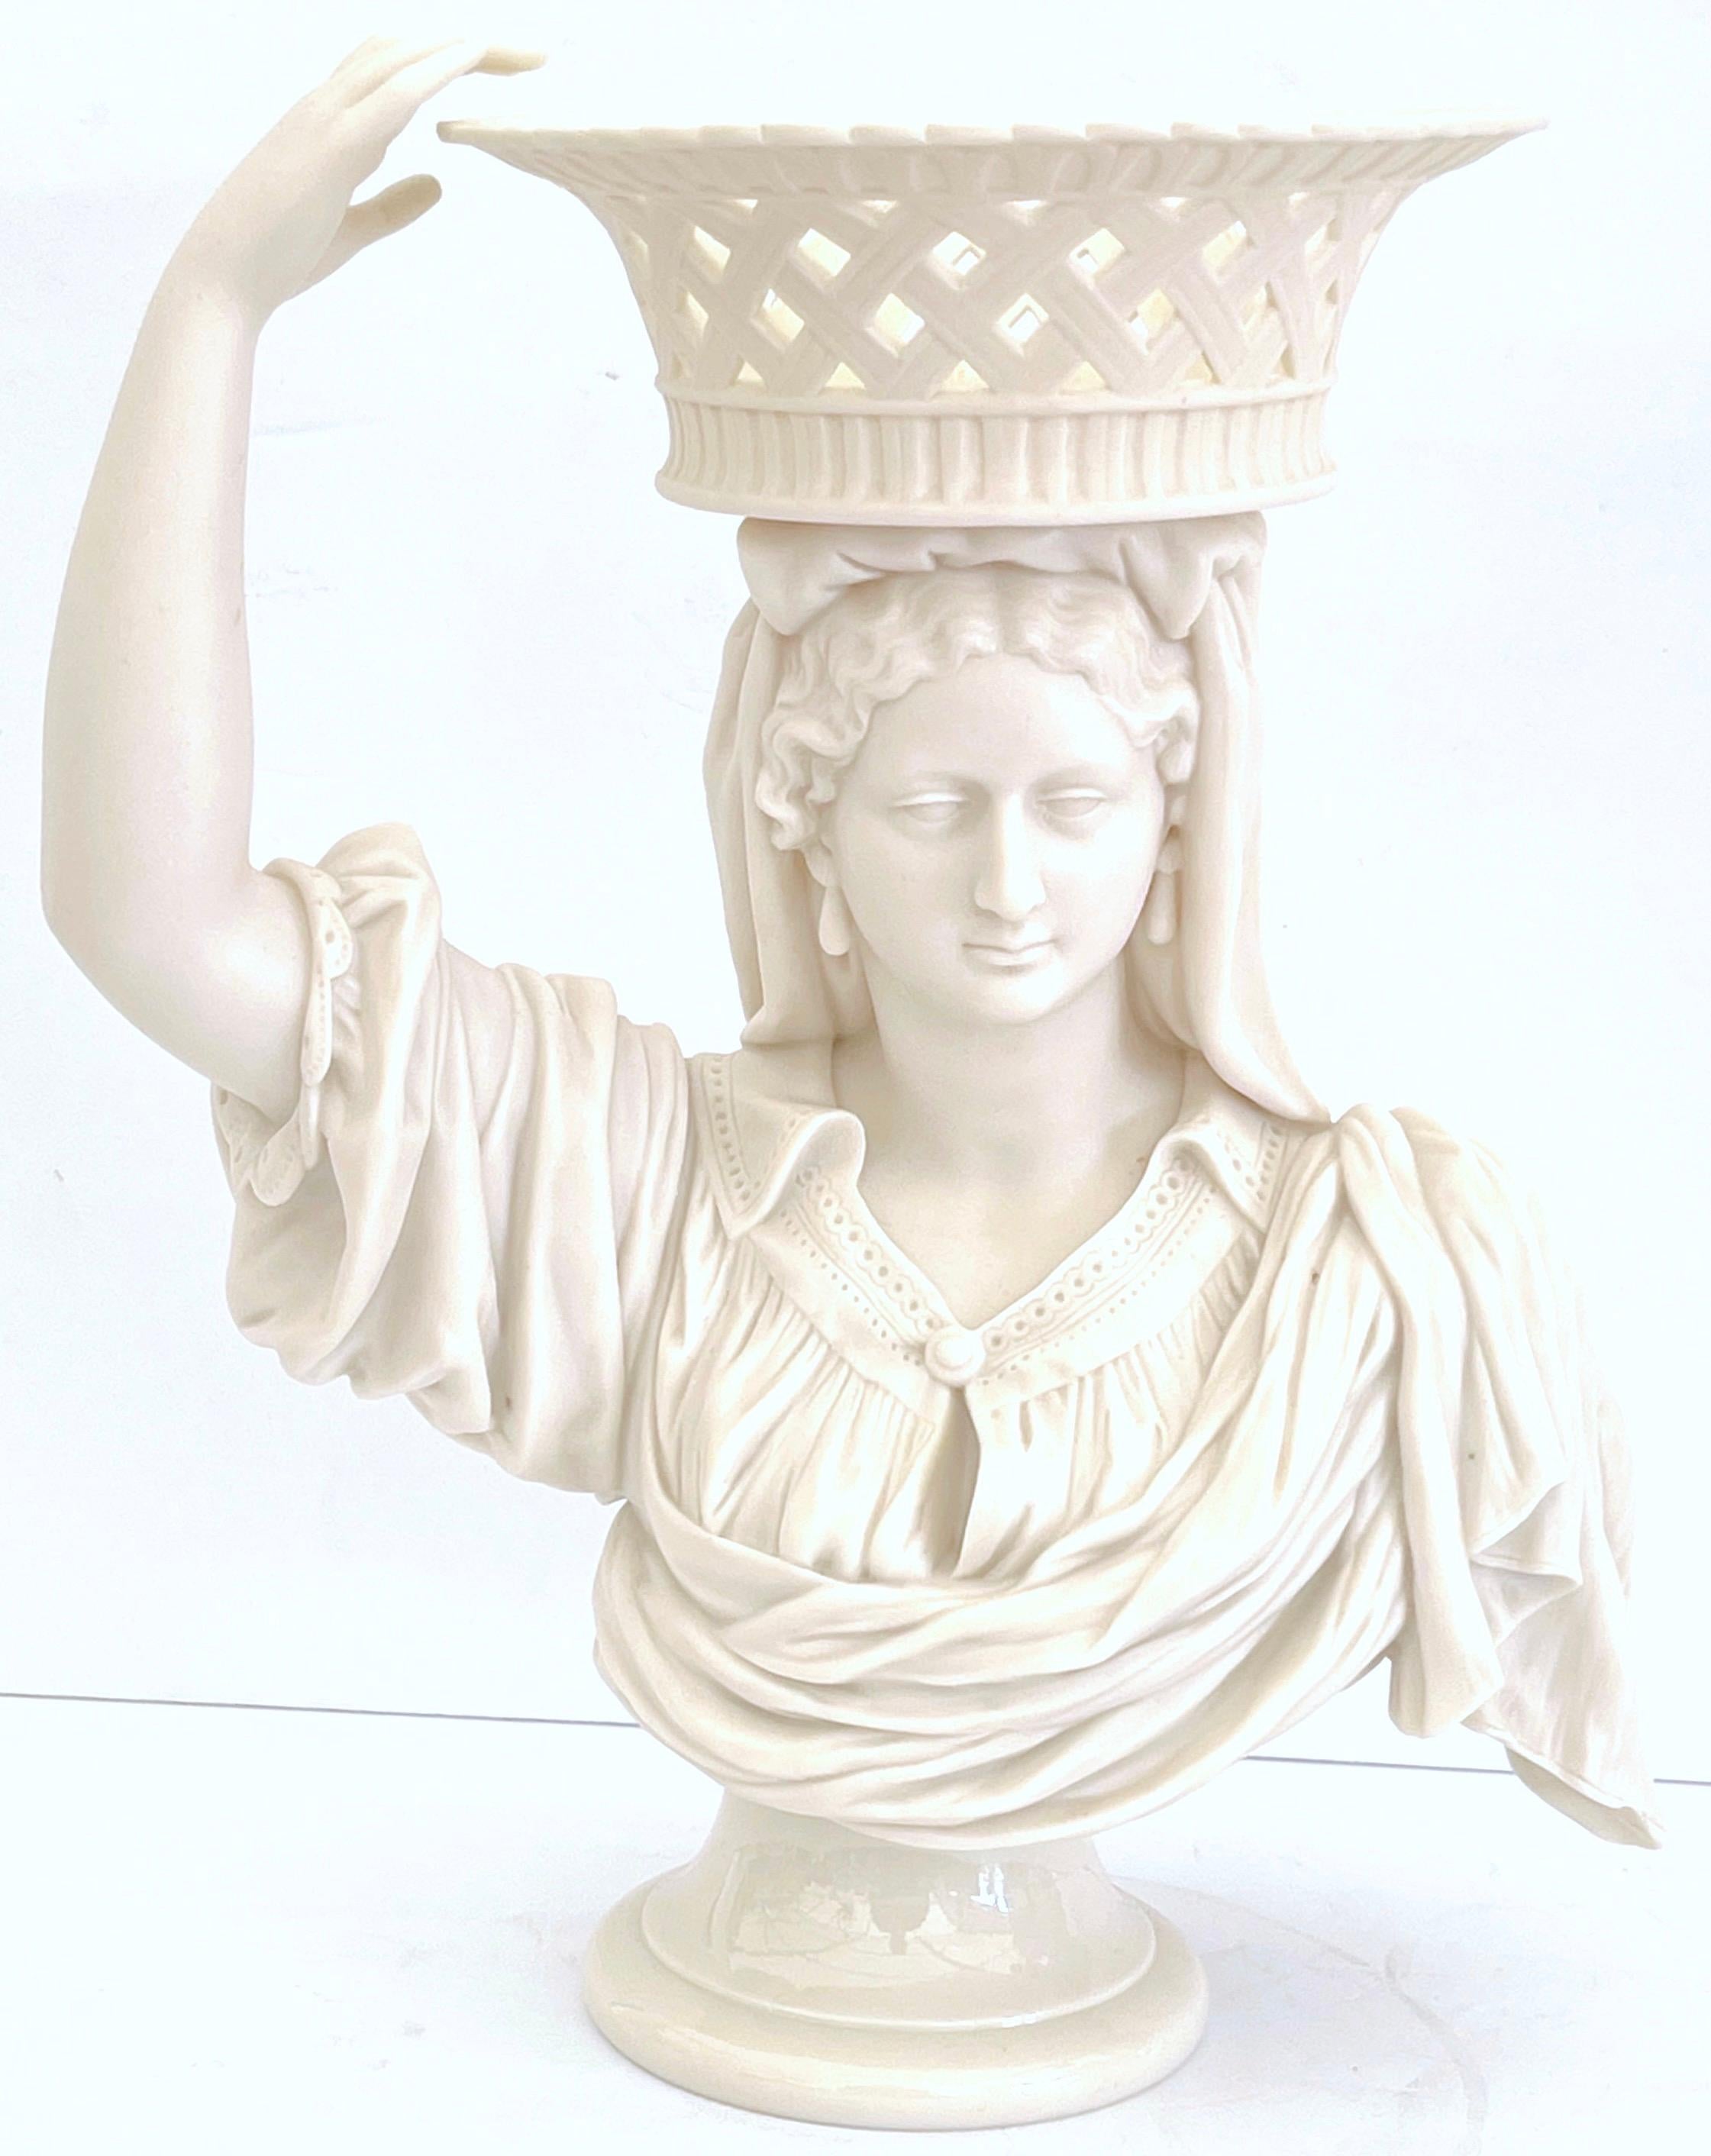 19th Century English Parian Lady Holding a Basket Centerpiece/ Tazza/ Vase 
Unmarked, Attributed to Copeland 
A stunning 19th Century English Parian Lady Holding a Basket Centerpiece, attributed to Copeland, although unmarked. This remarkable piece